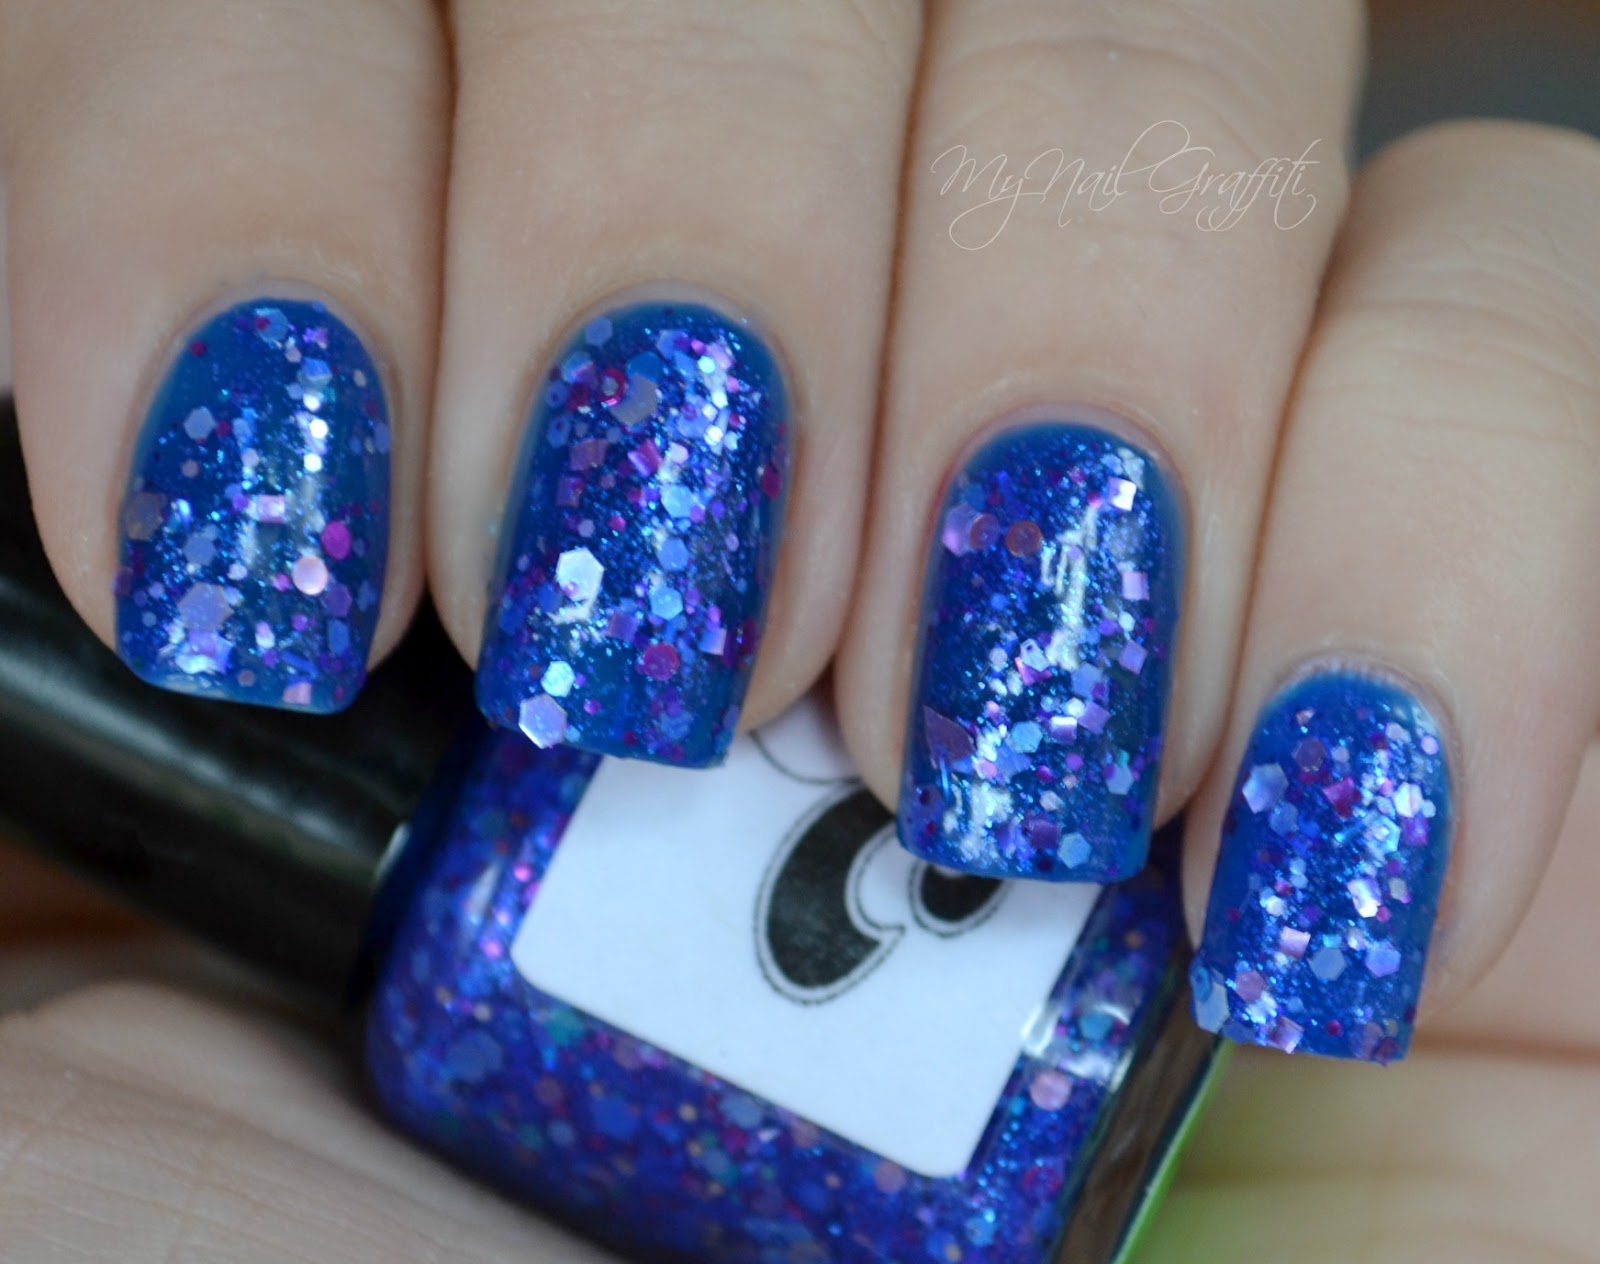 My Nail Graffiti: Jindie Nails Winter Chic Collection Swatches and Review!